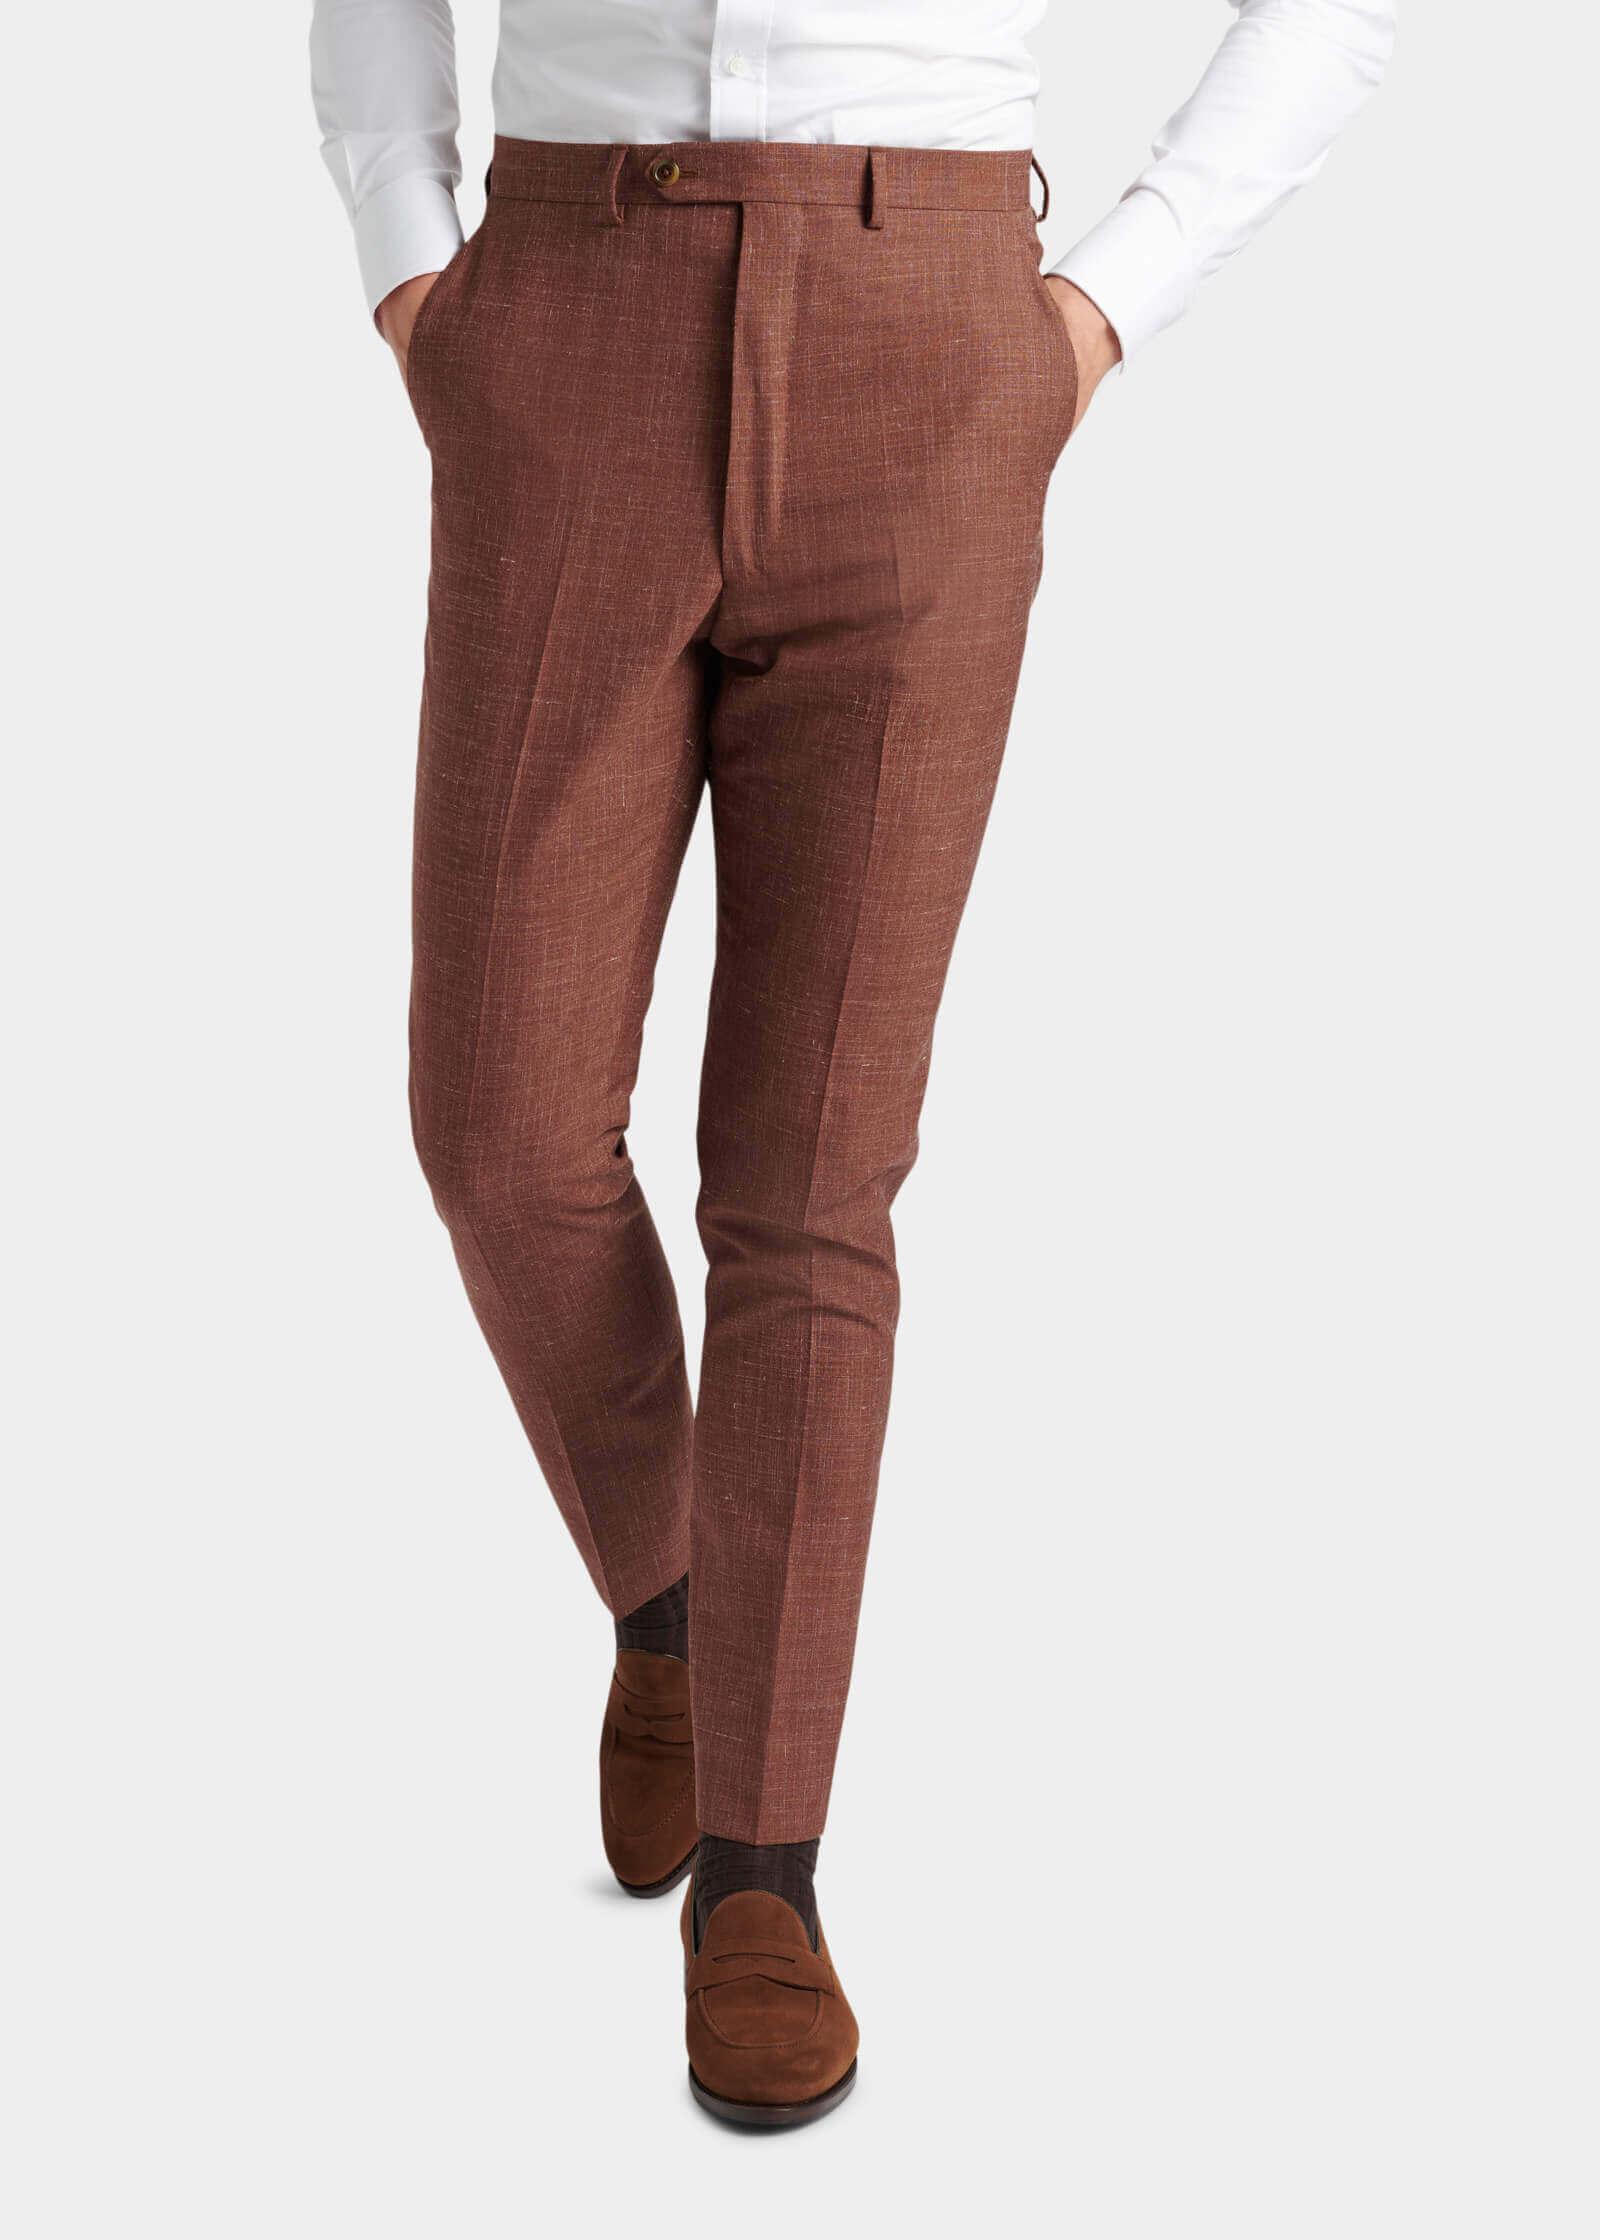 Light Grey Drawstring Ames Trousers in Pure S120s Tropical Wool   SUITSUPPLY US